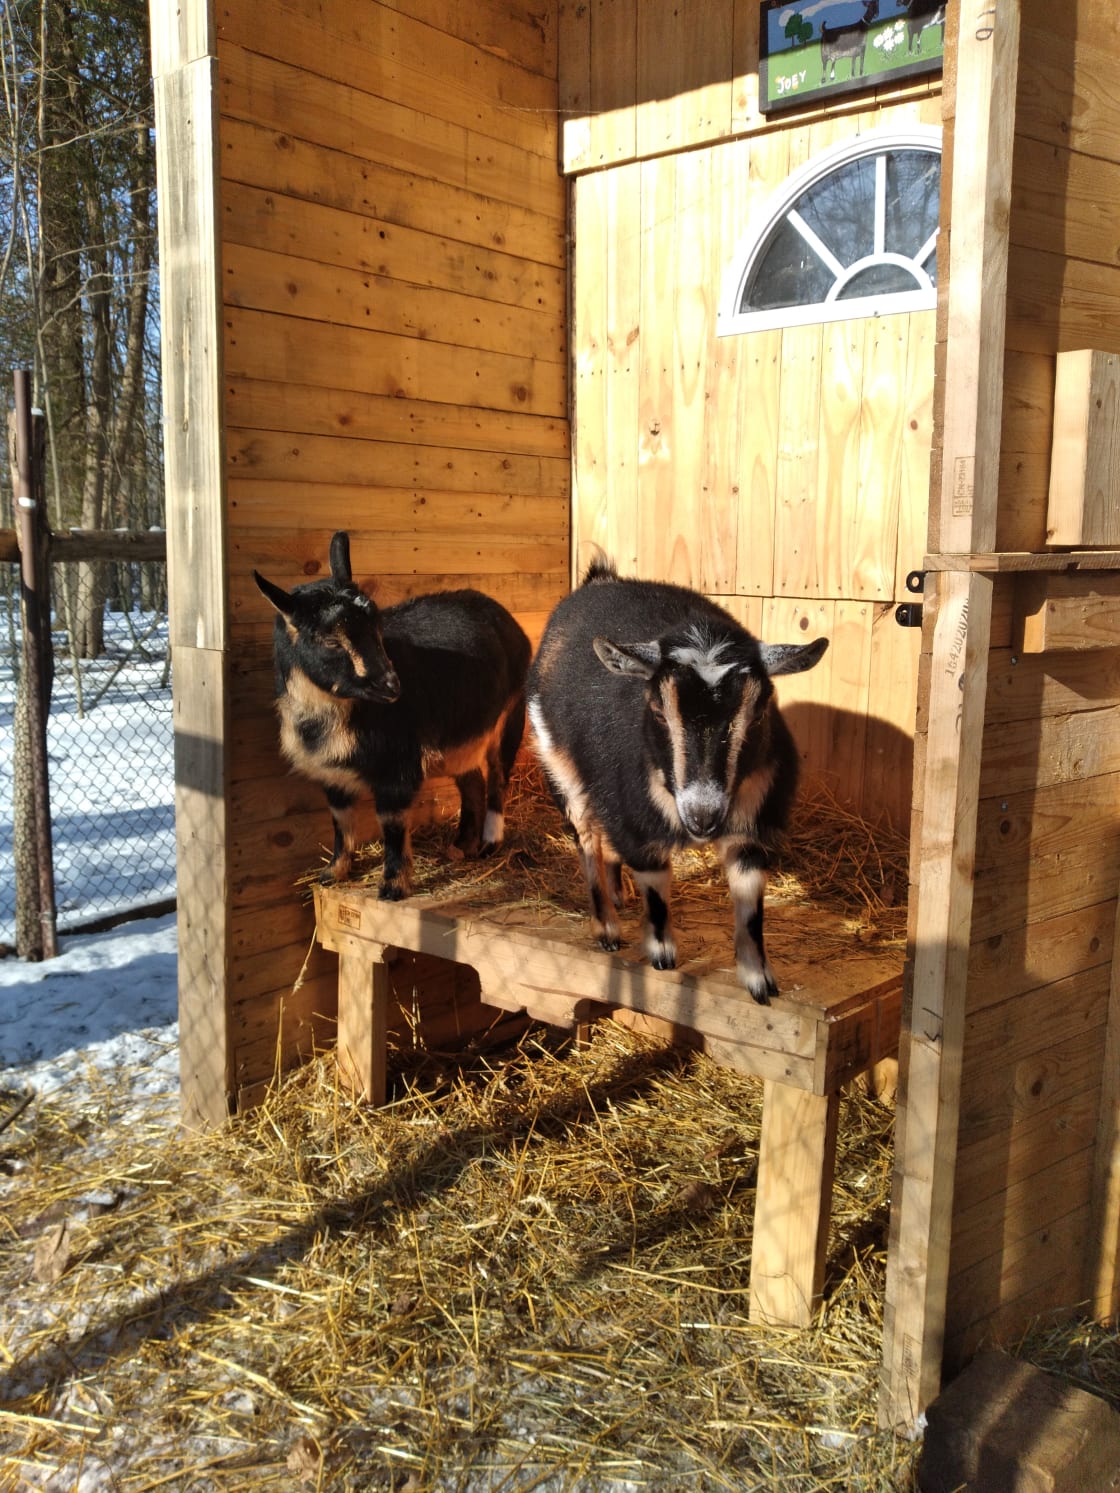 Jazzy & Joey looking to catch some "warm rays" on a winter's morning.